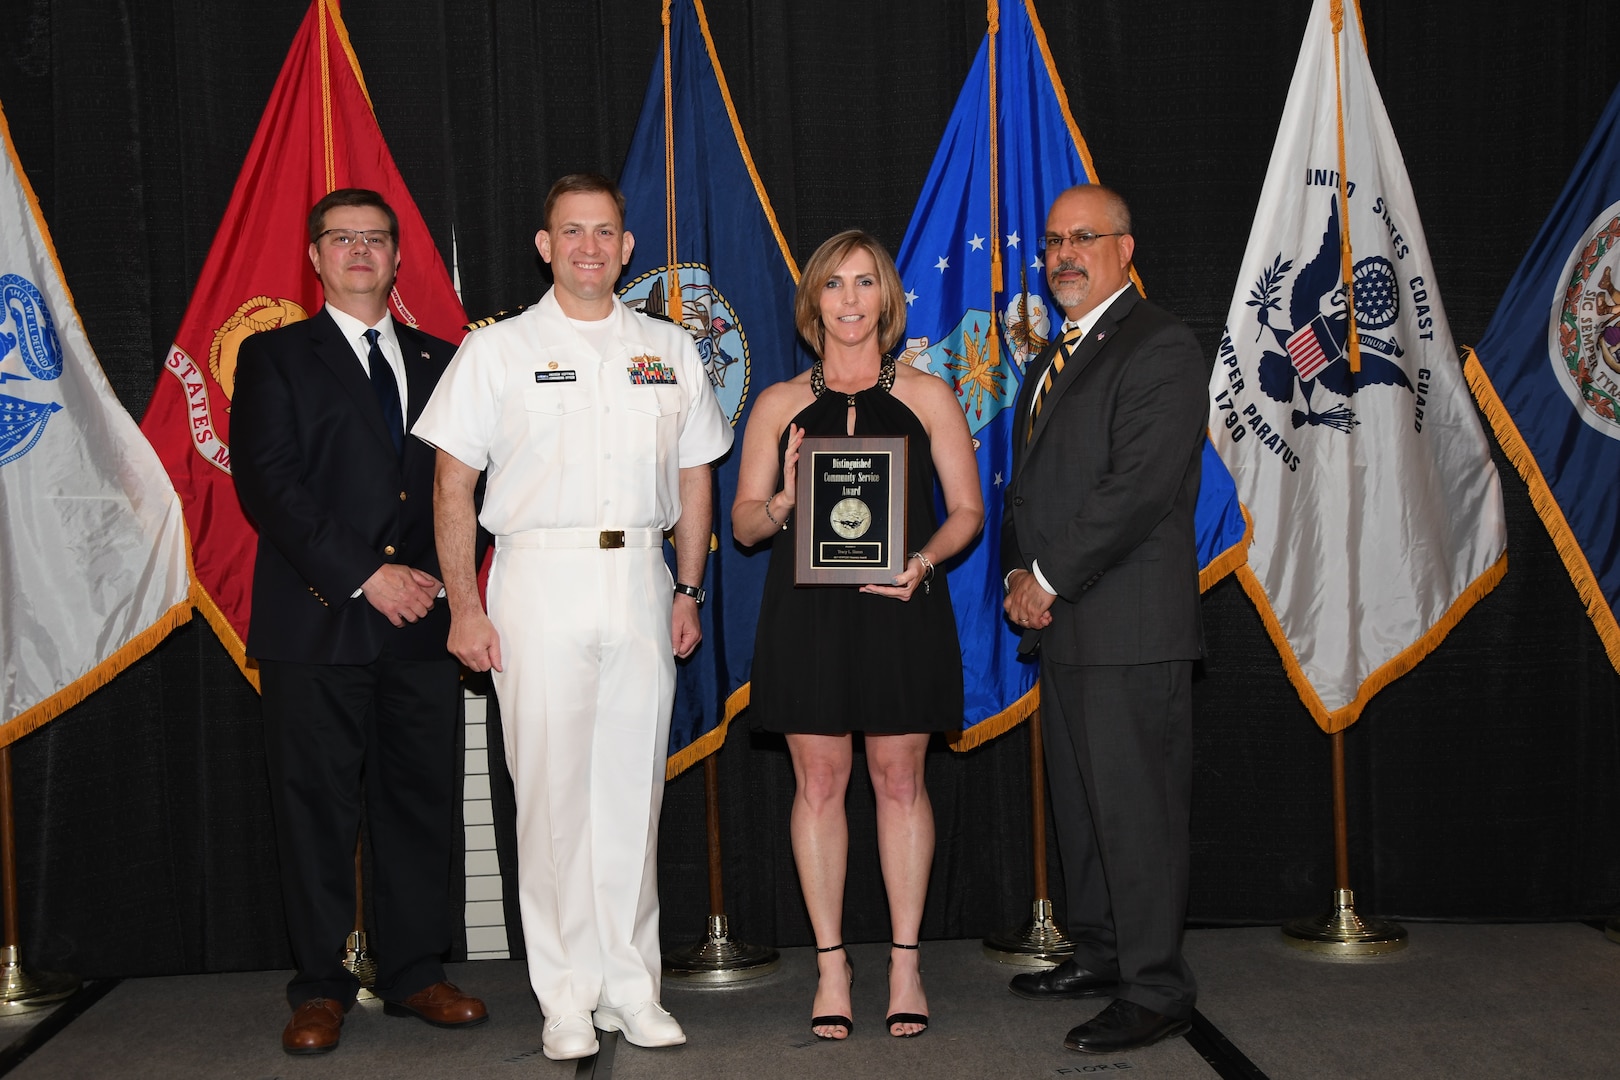 IMAGE: Tracy Sisson is presented the Distinguished Community Service Award at Naval Surface Warfare Center Dahlgren Division's annual awards ceremony, Apr. 26 at the Fredericksburg Expo and Conference Center.